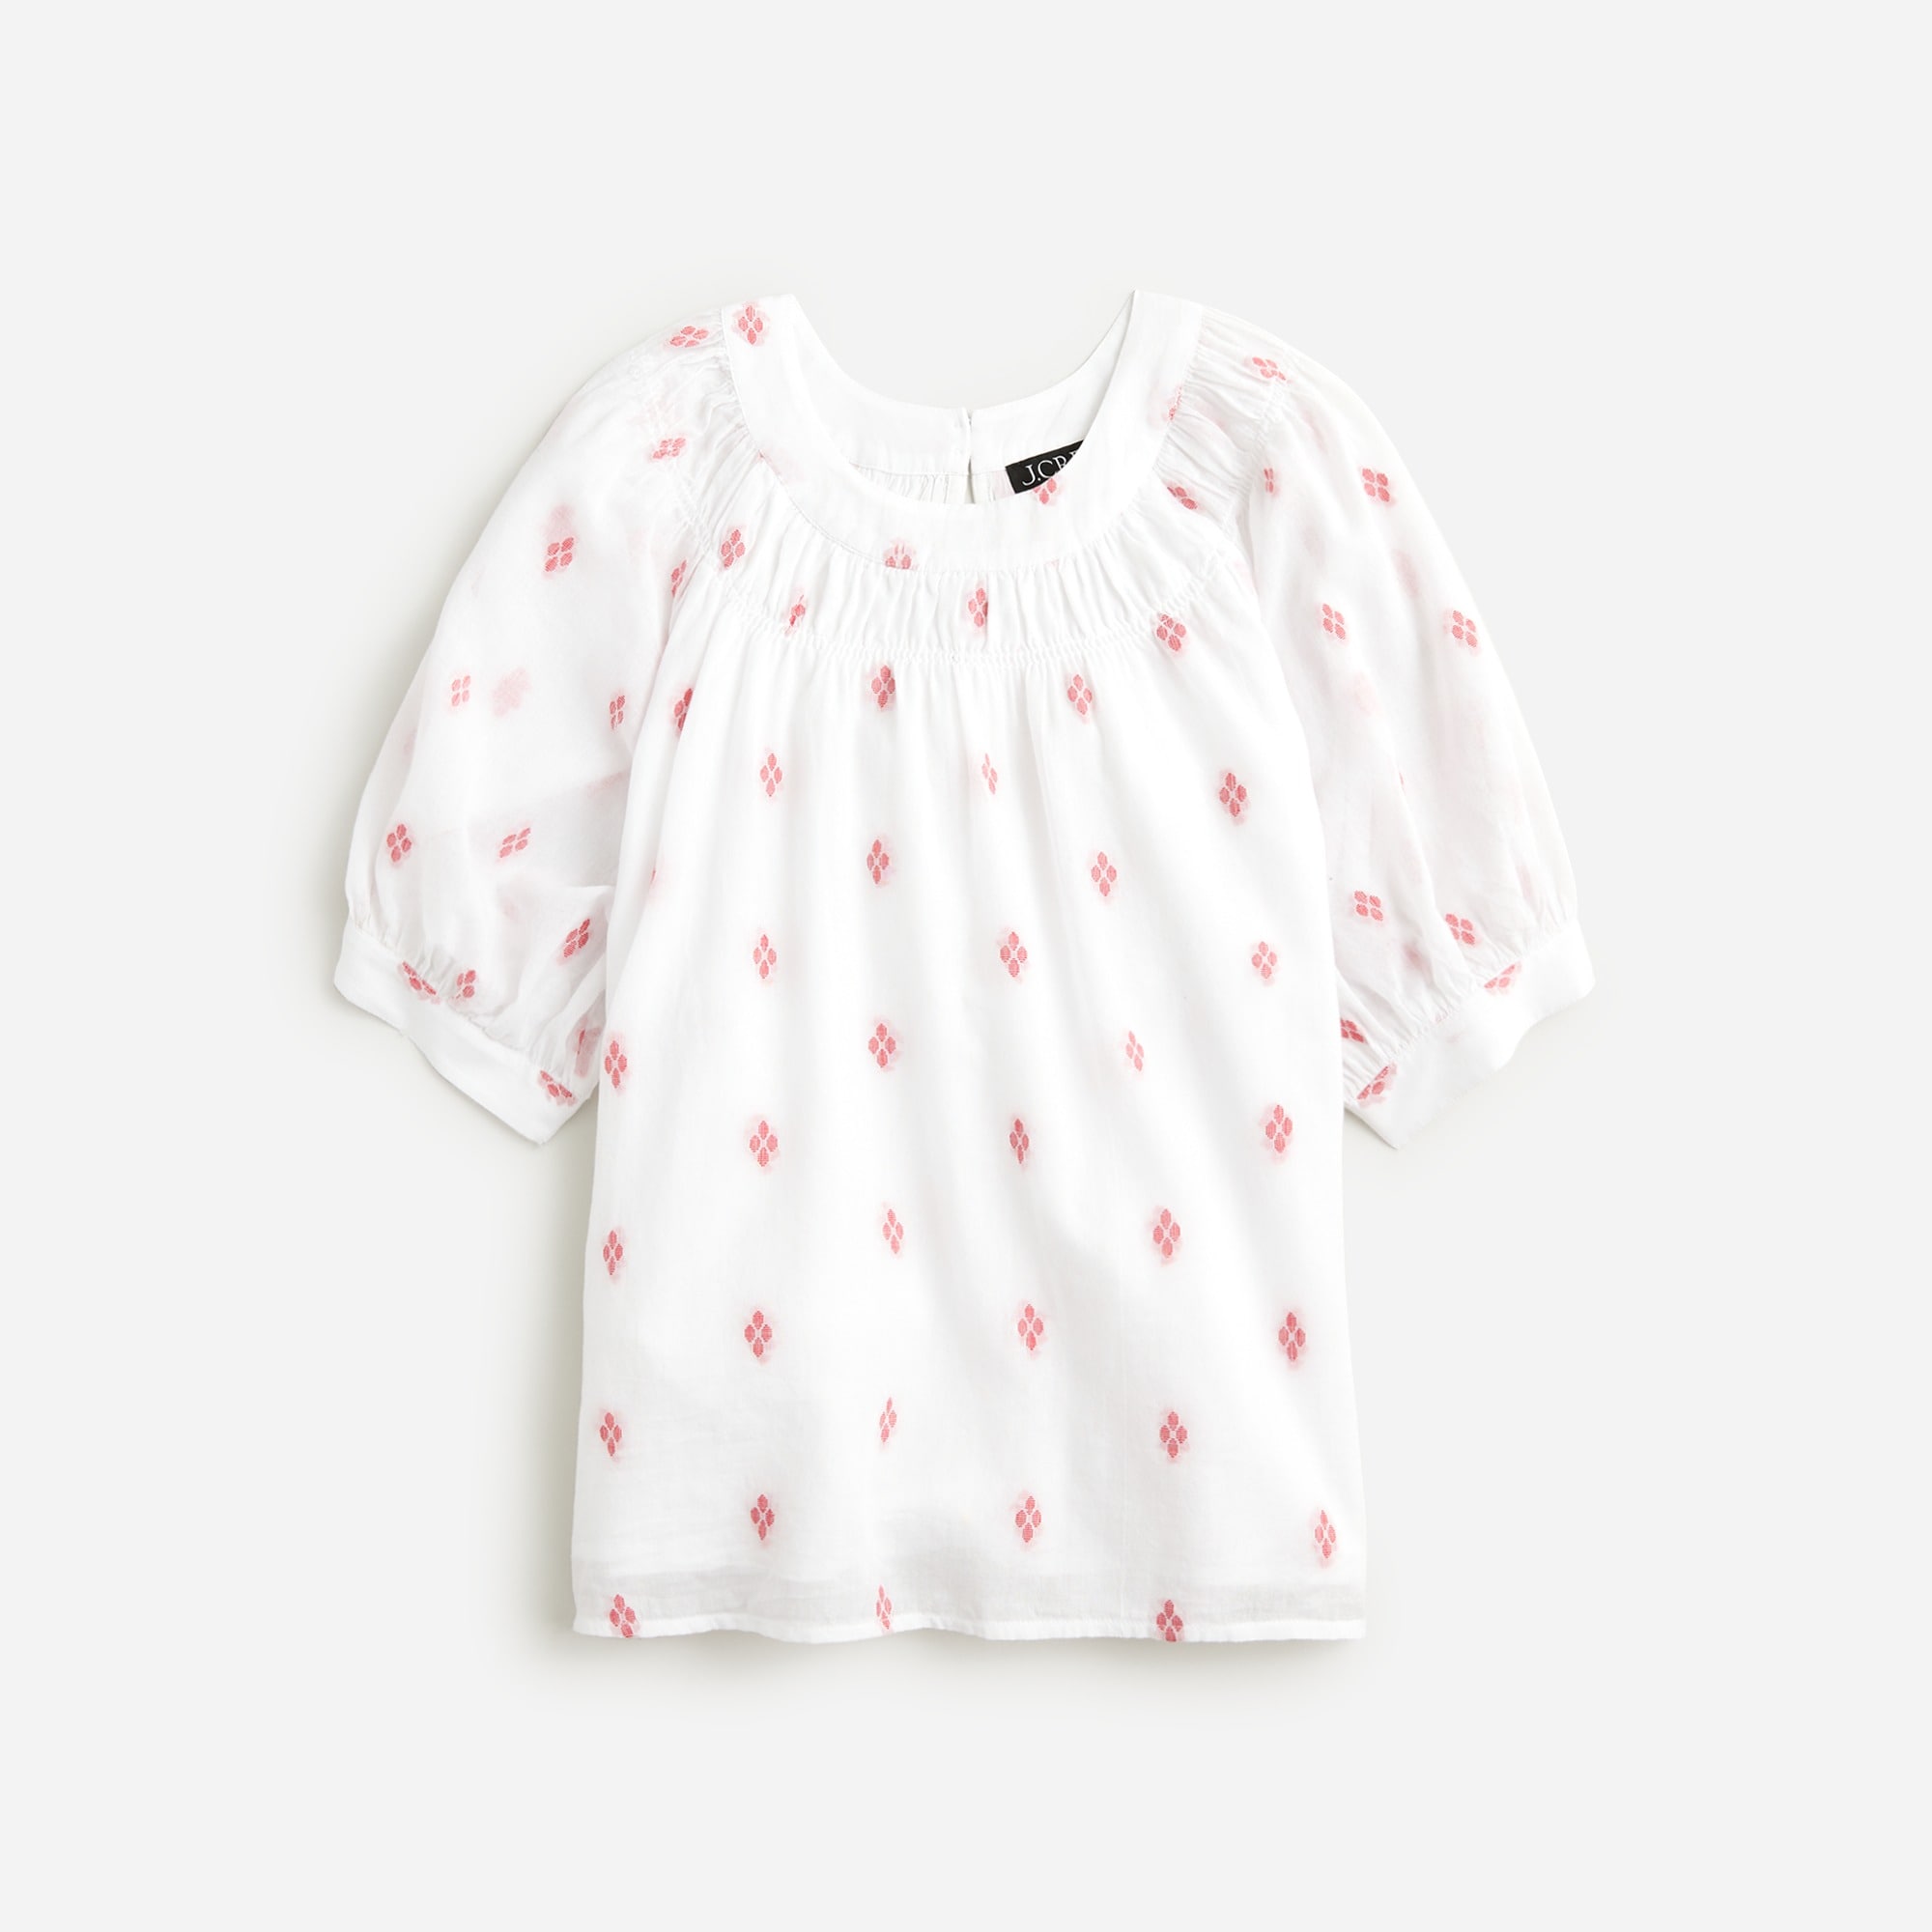  Smock-neck puff-sleeve top in dot